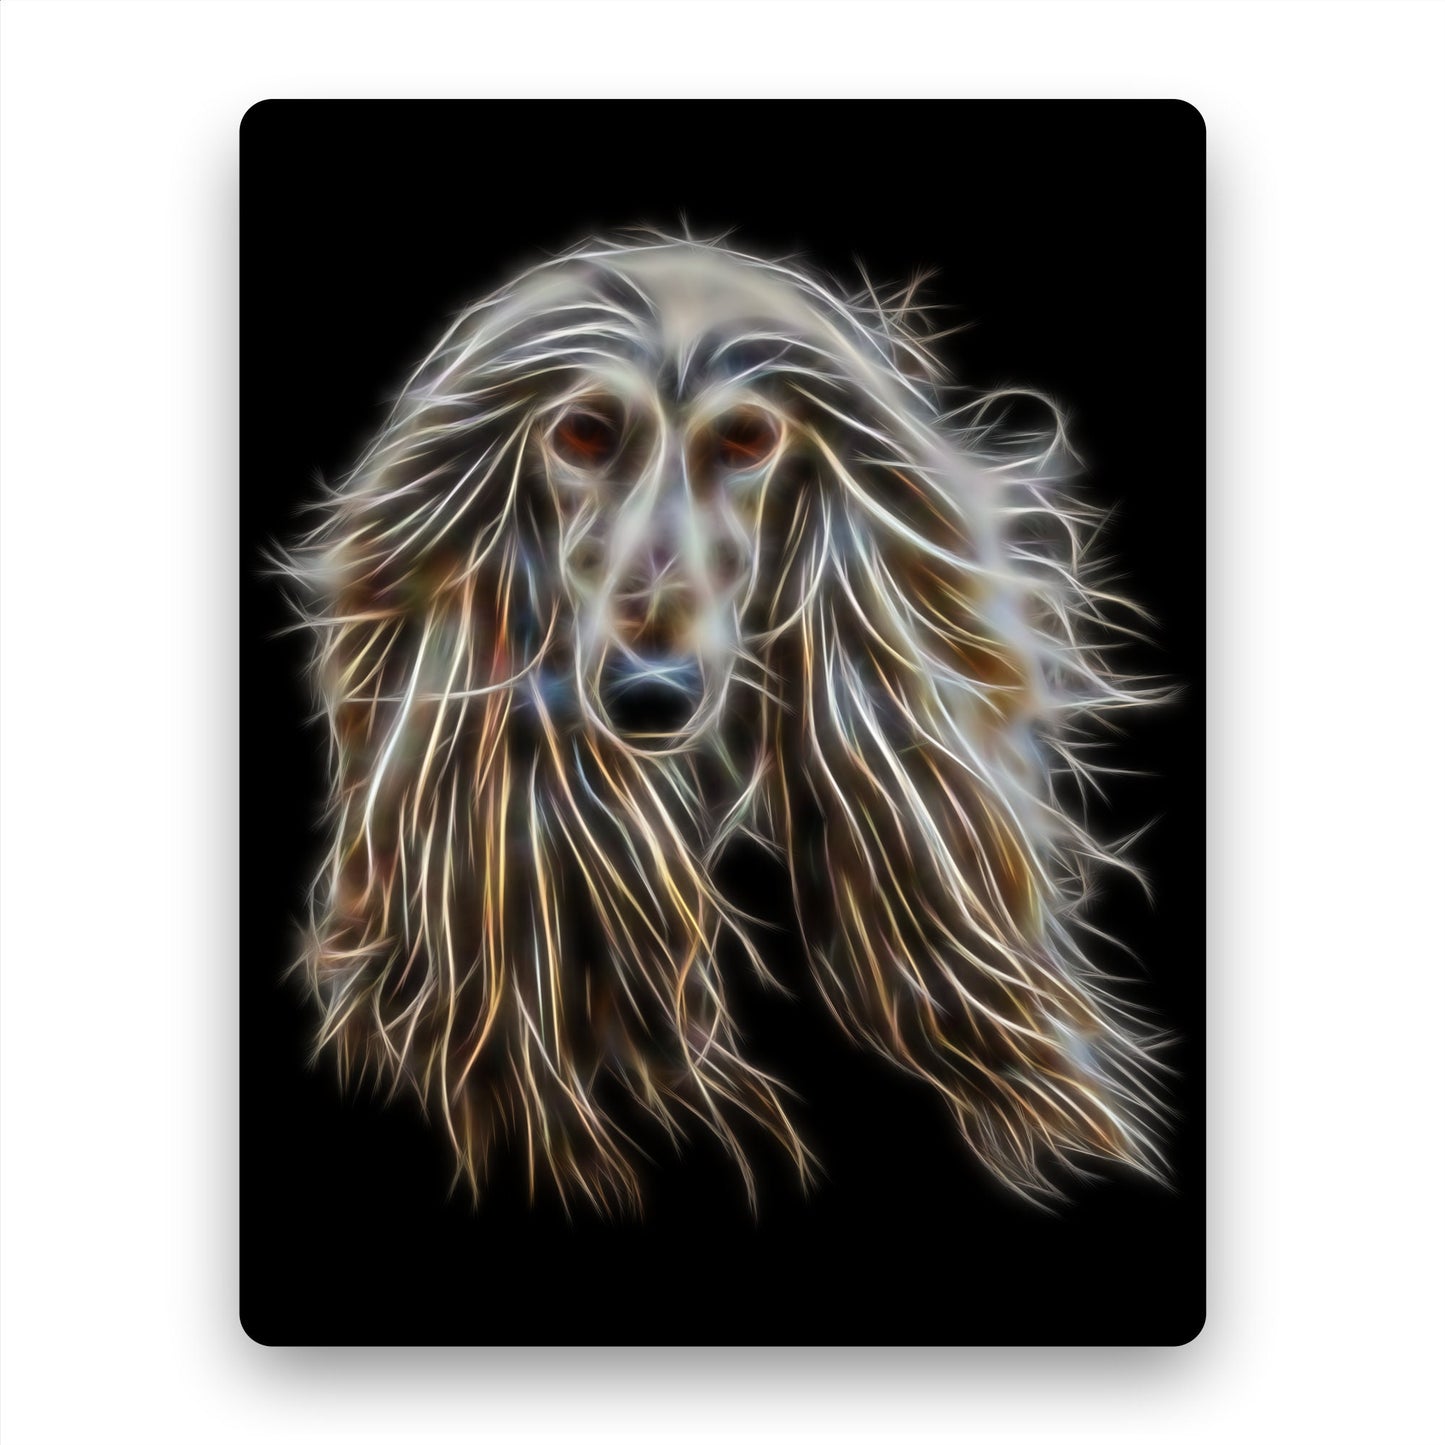 Afghan Hound Metal Wall Plaque with Stunning Fractal Art Design